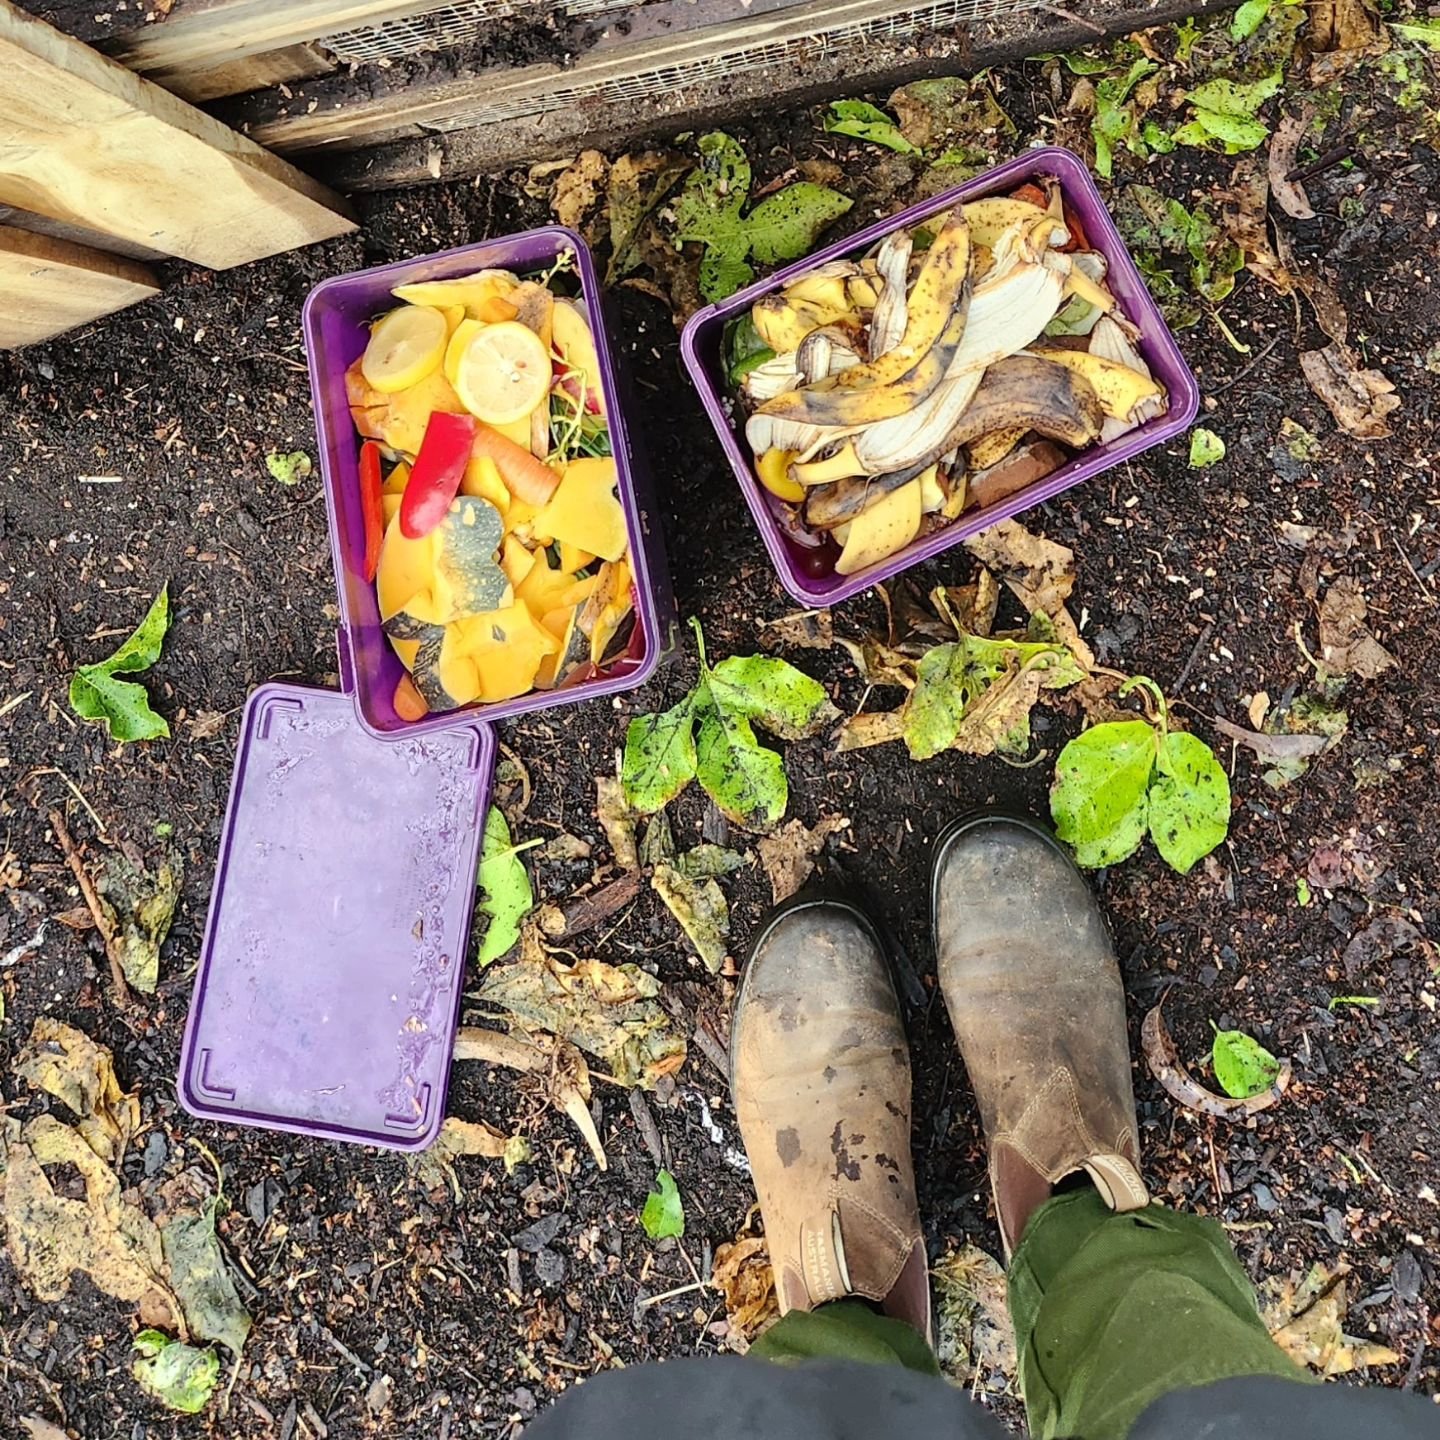 A compost rainbow 🌈 

Sign up to Swap and Go and we'll compost your food scraps for you! 

You'll get a kitchen caddy to collect your kitchen scraps. All you need to do is drop them to a Swap Station and swap your full caddy for a fresh one. We'll t